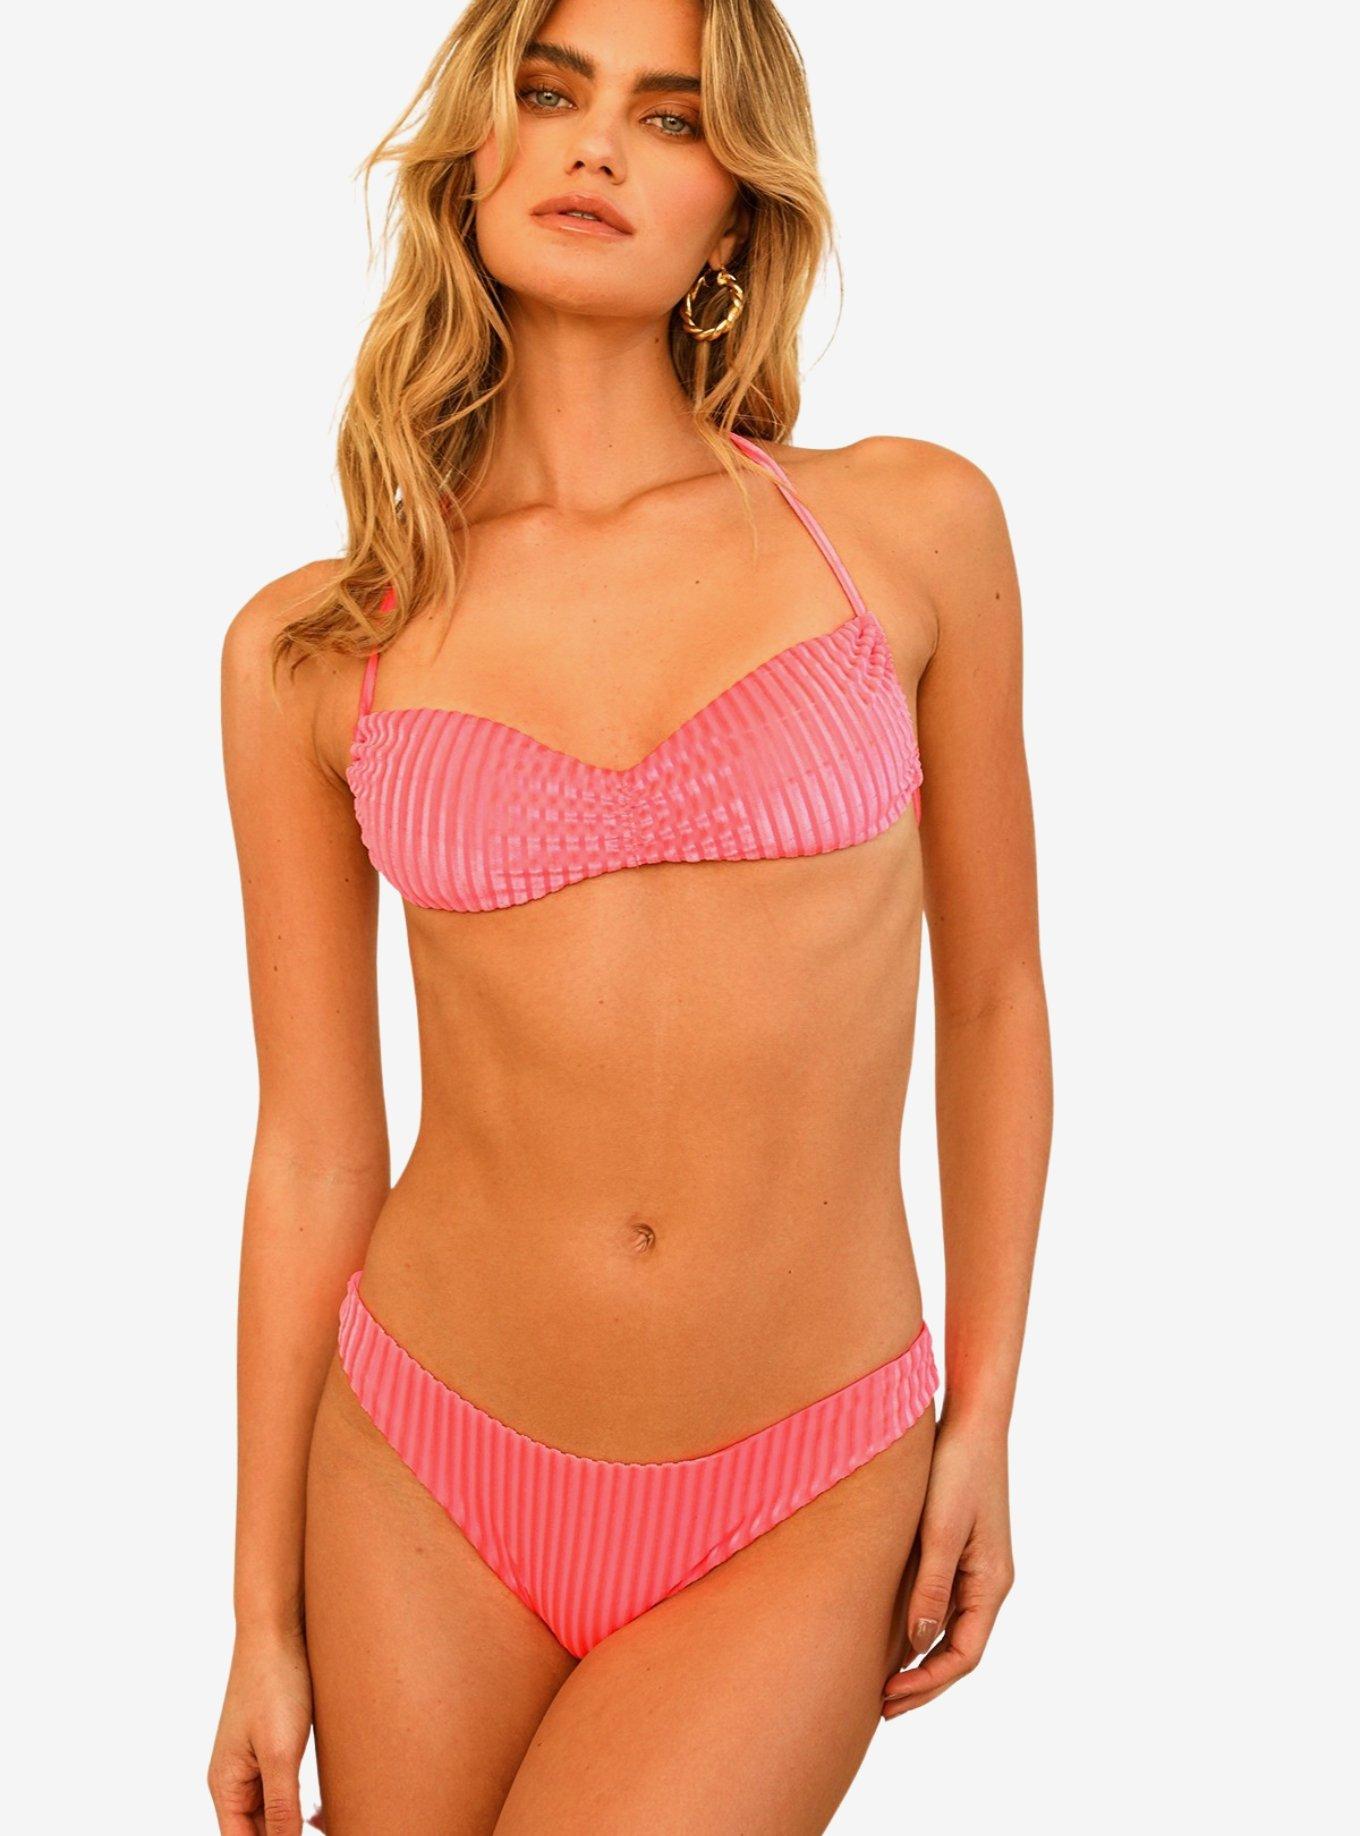 Dippin' Daisy's Christina Tie Bandeau Swim Top Neon Pink, NEON PINK, hi-res